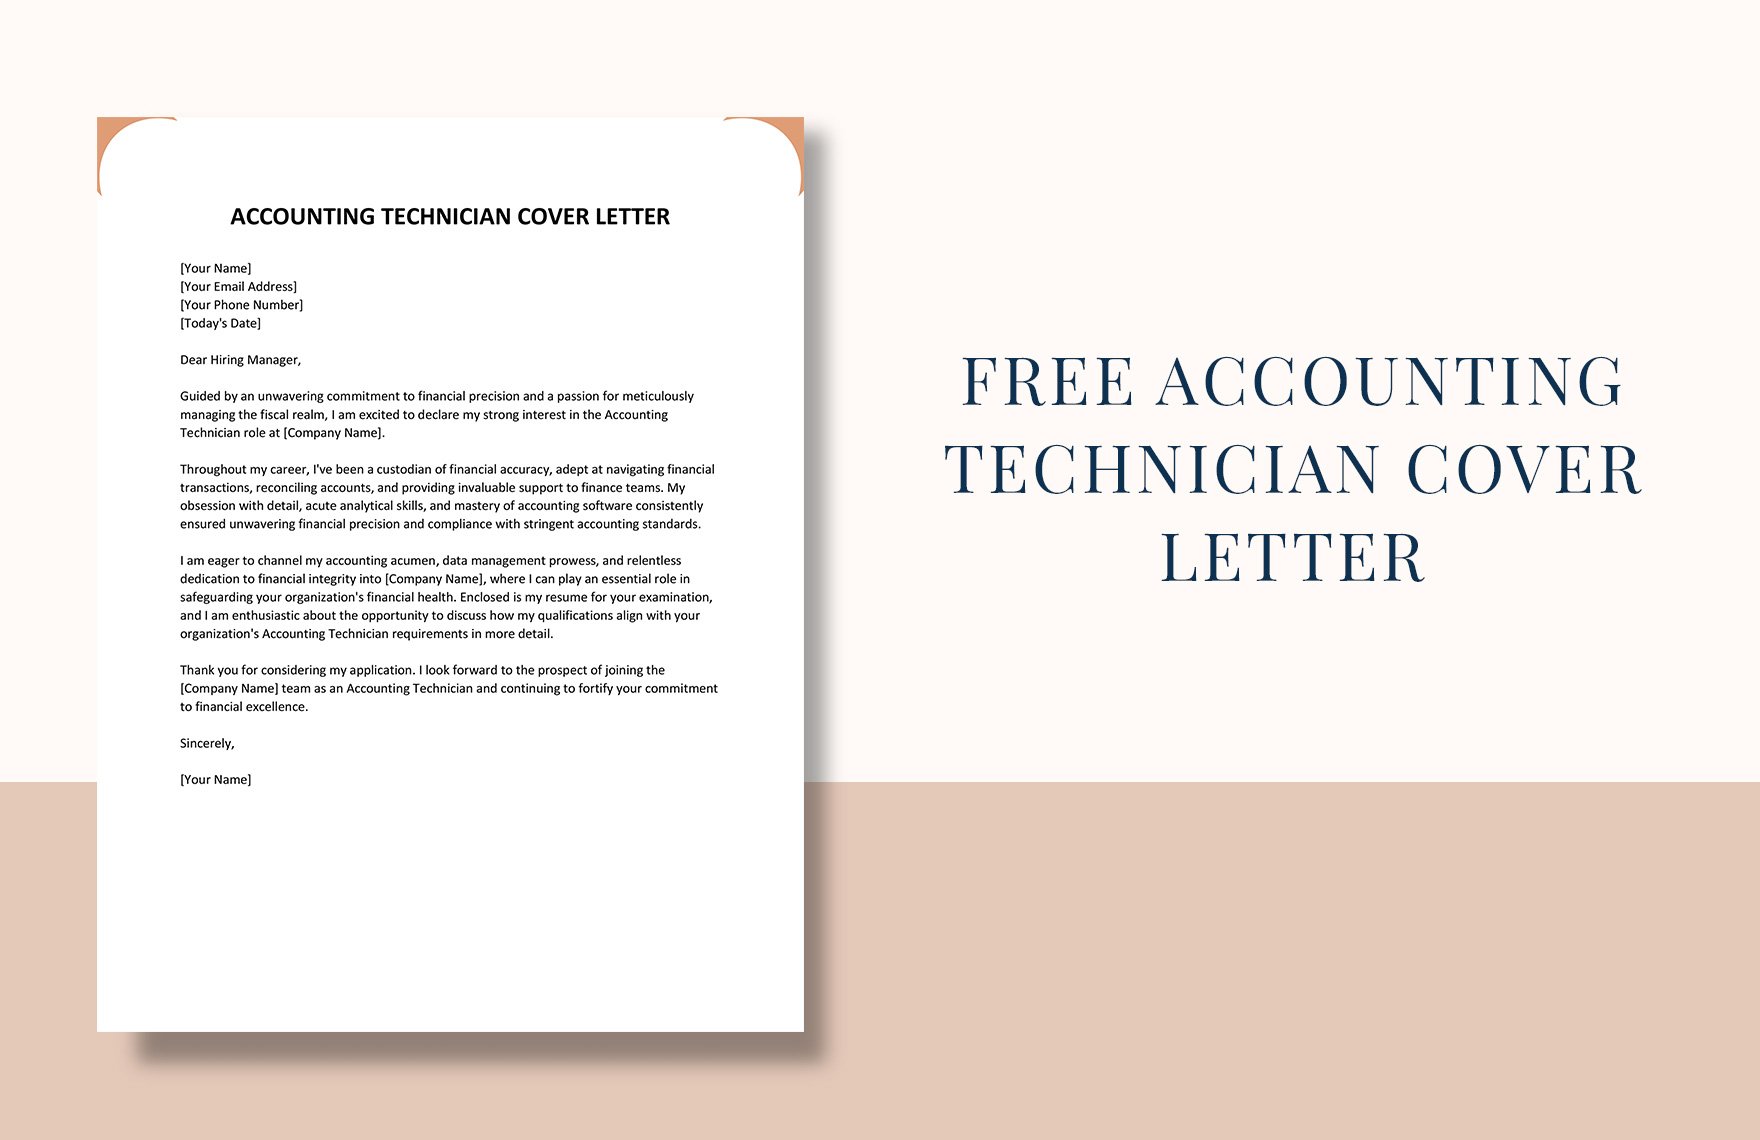 Accounting Technician Cover Letter